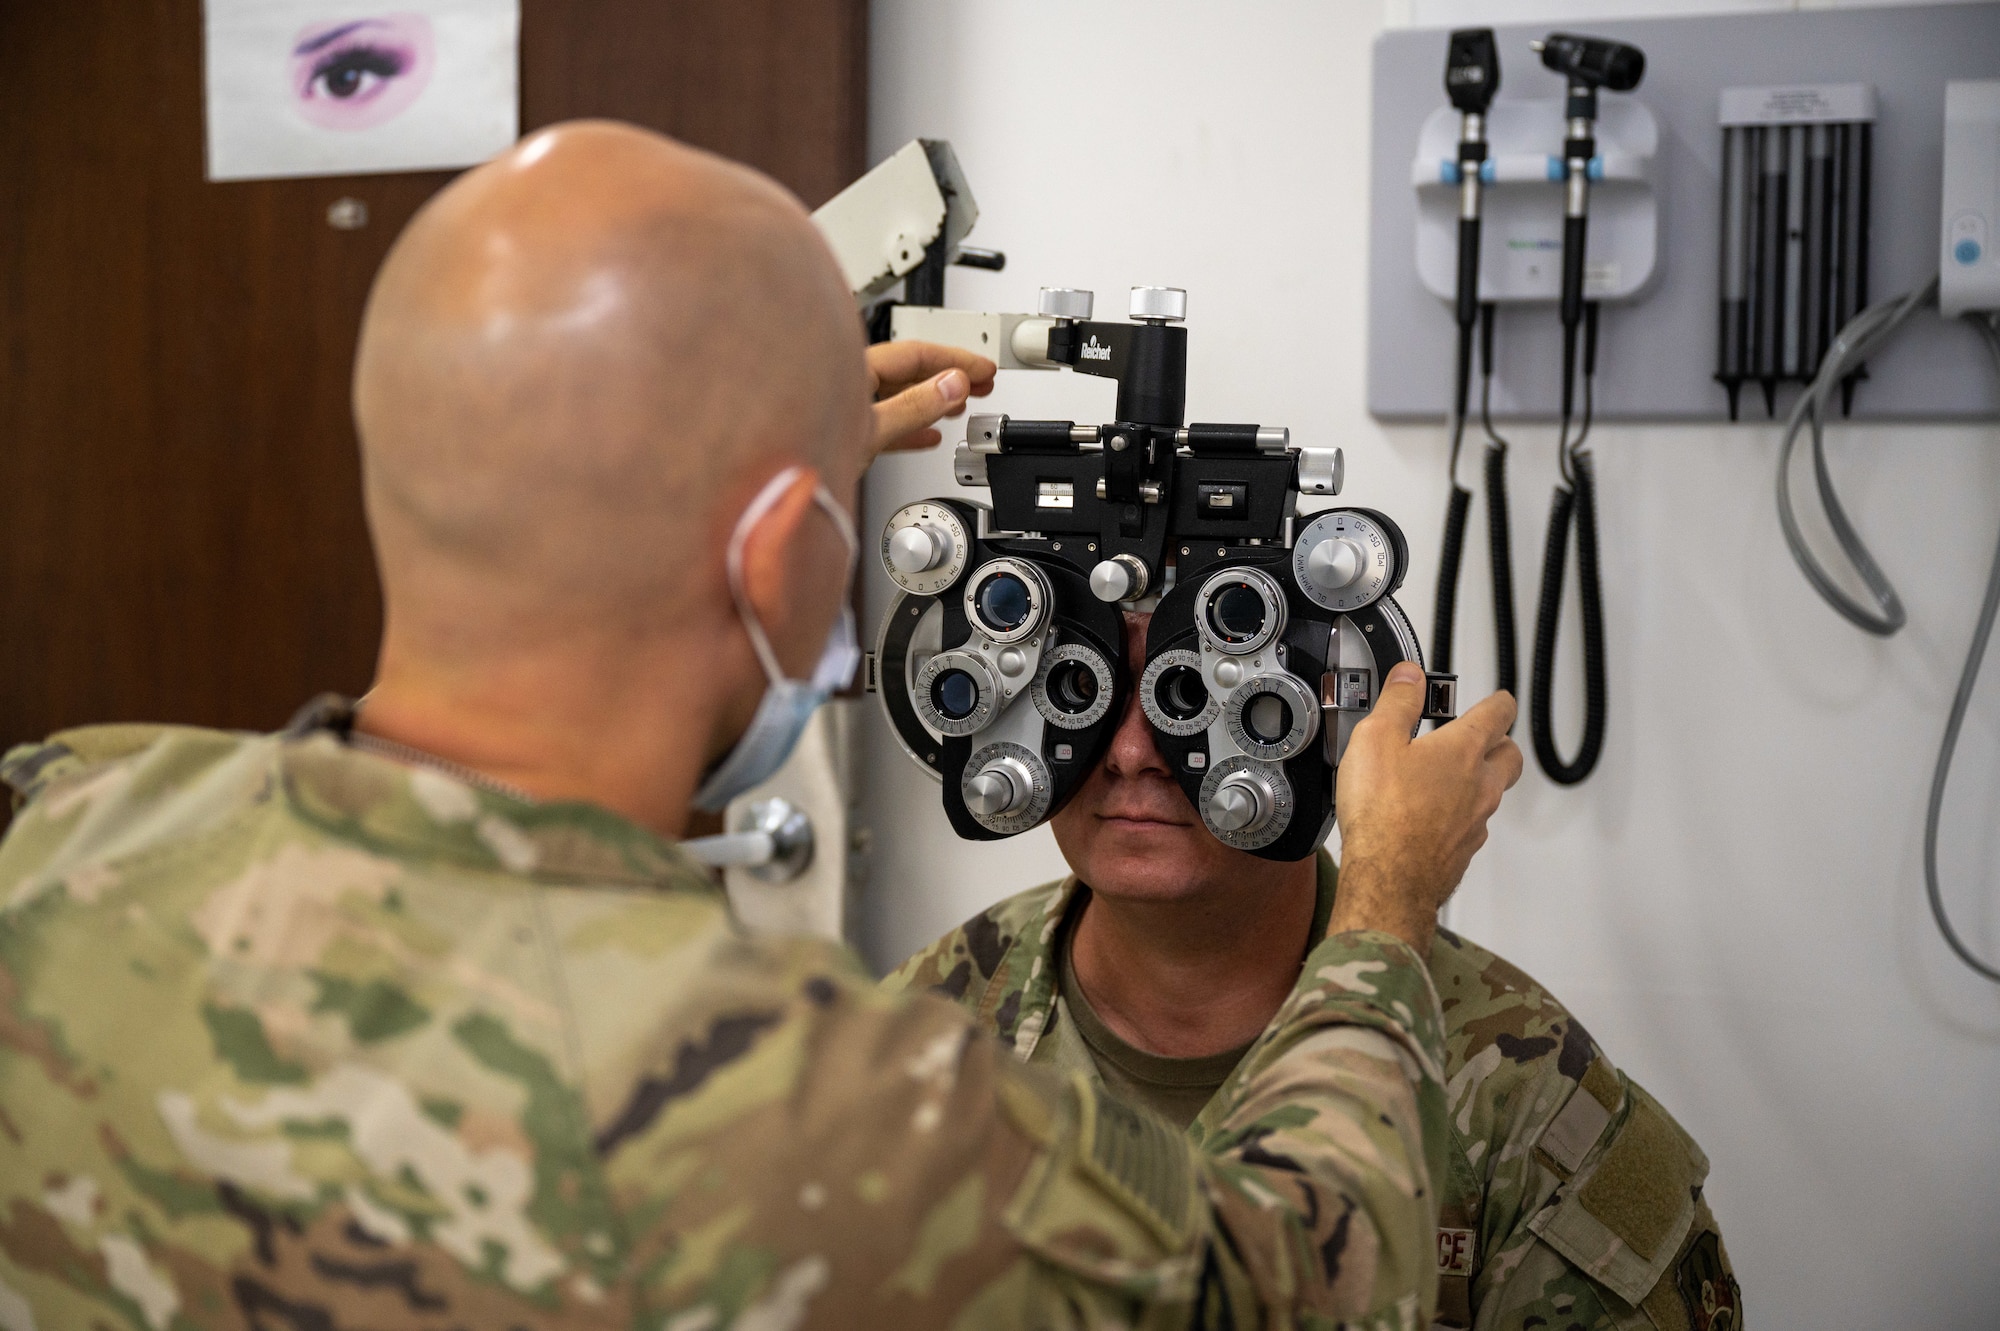 The 386th Expeditionary Medical Group hosted an optometry clinic for service members experiencing vision changes in their previous prescription or new changes that may require glasses.  It's important to have an optometry clinic available for vision readiness.